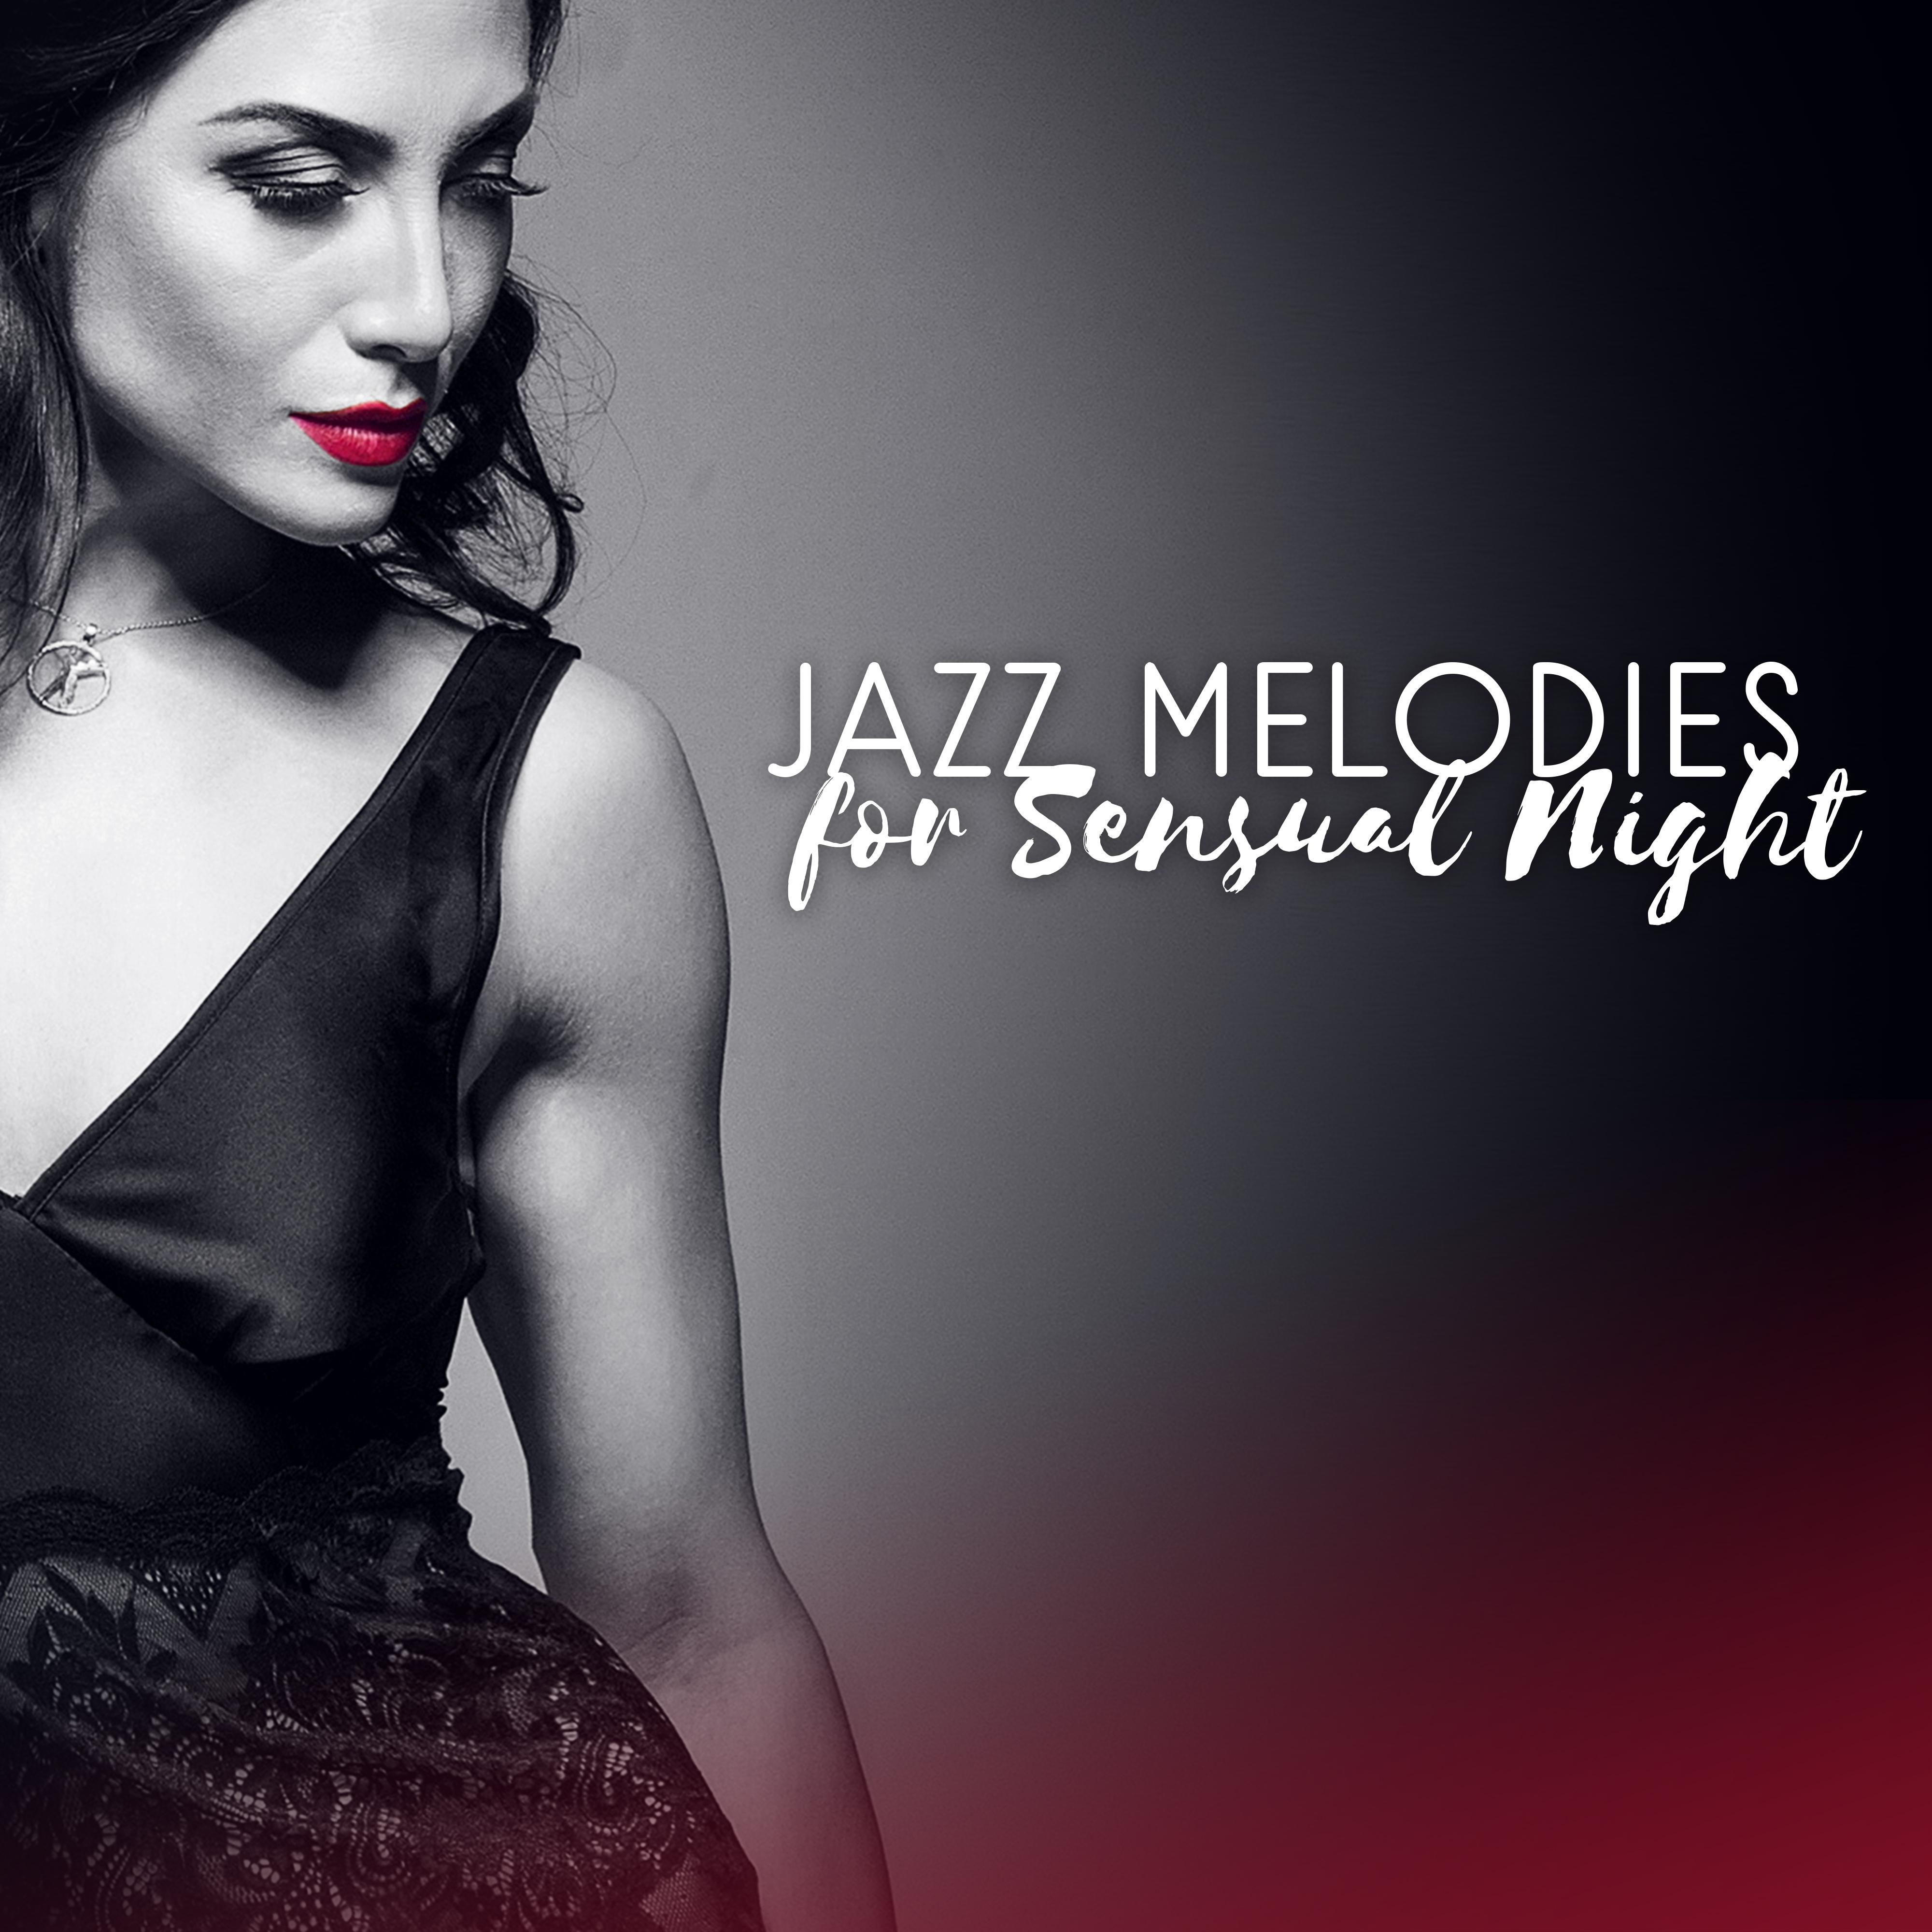 Jazz Melodies for Sensual Night